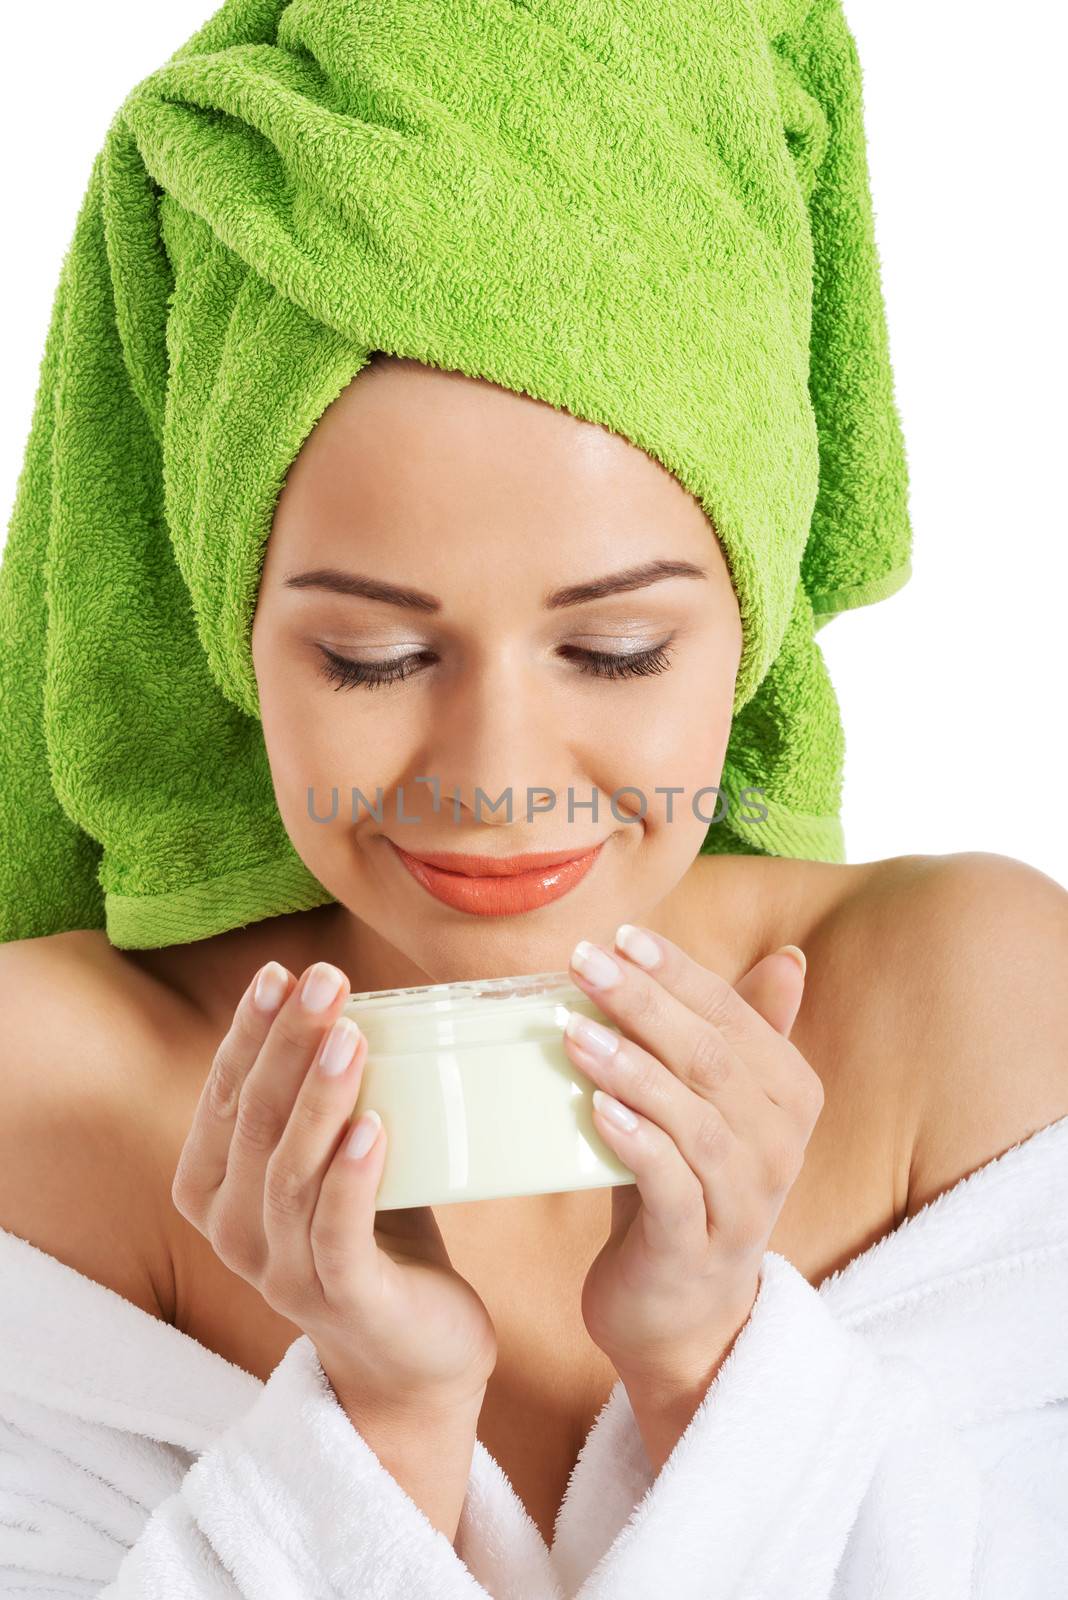 Beautiful woman in bathrobe and turban smelling body lotion. Isolated on white.